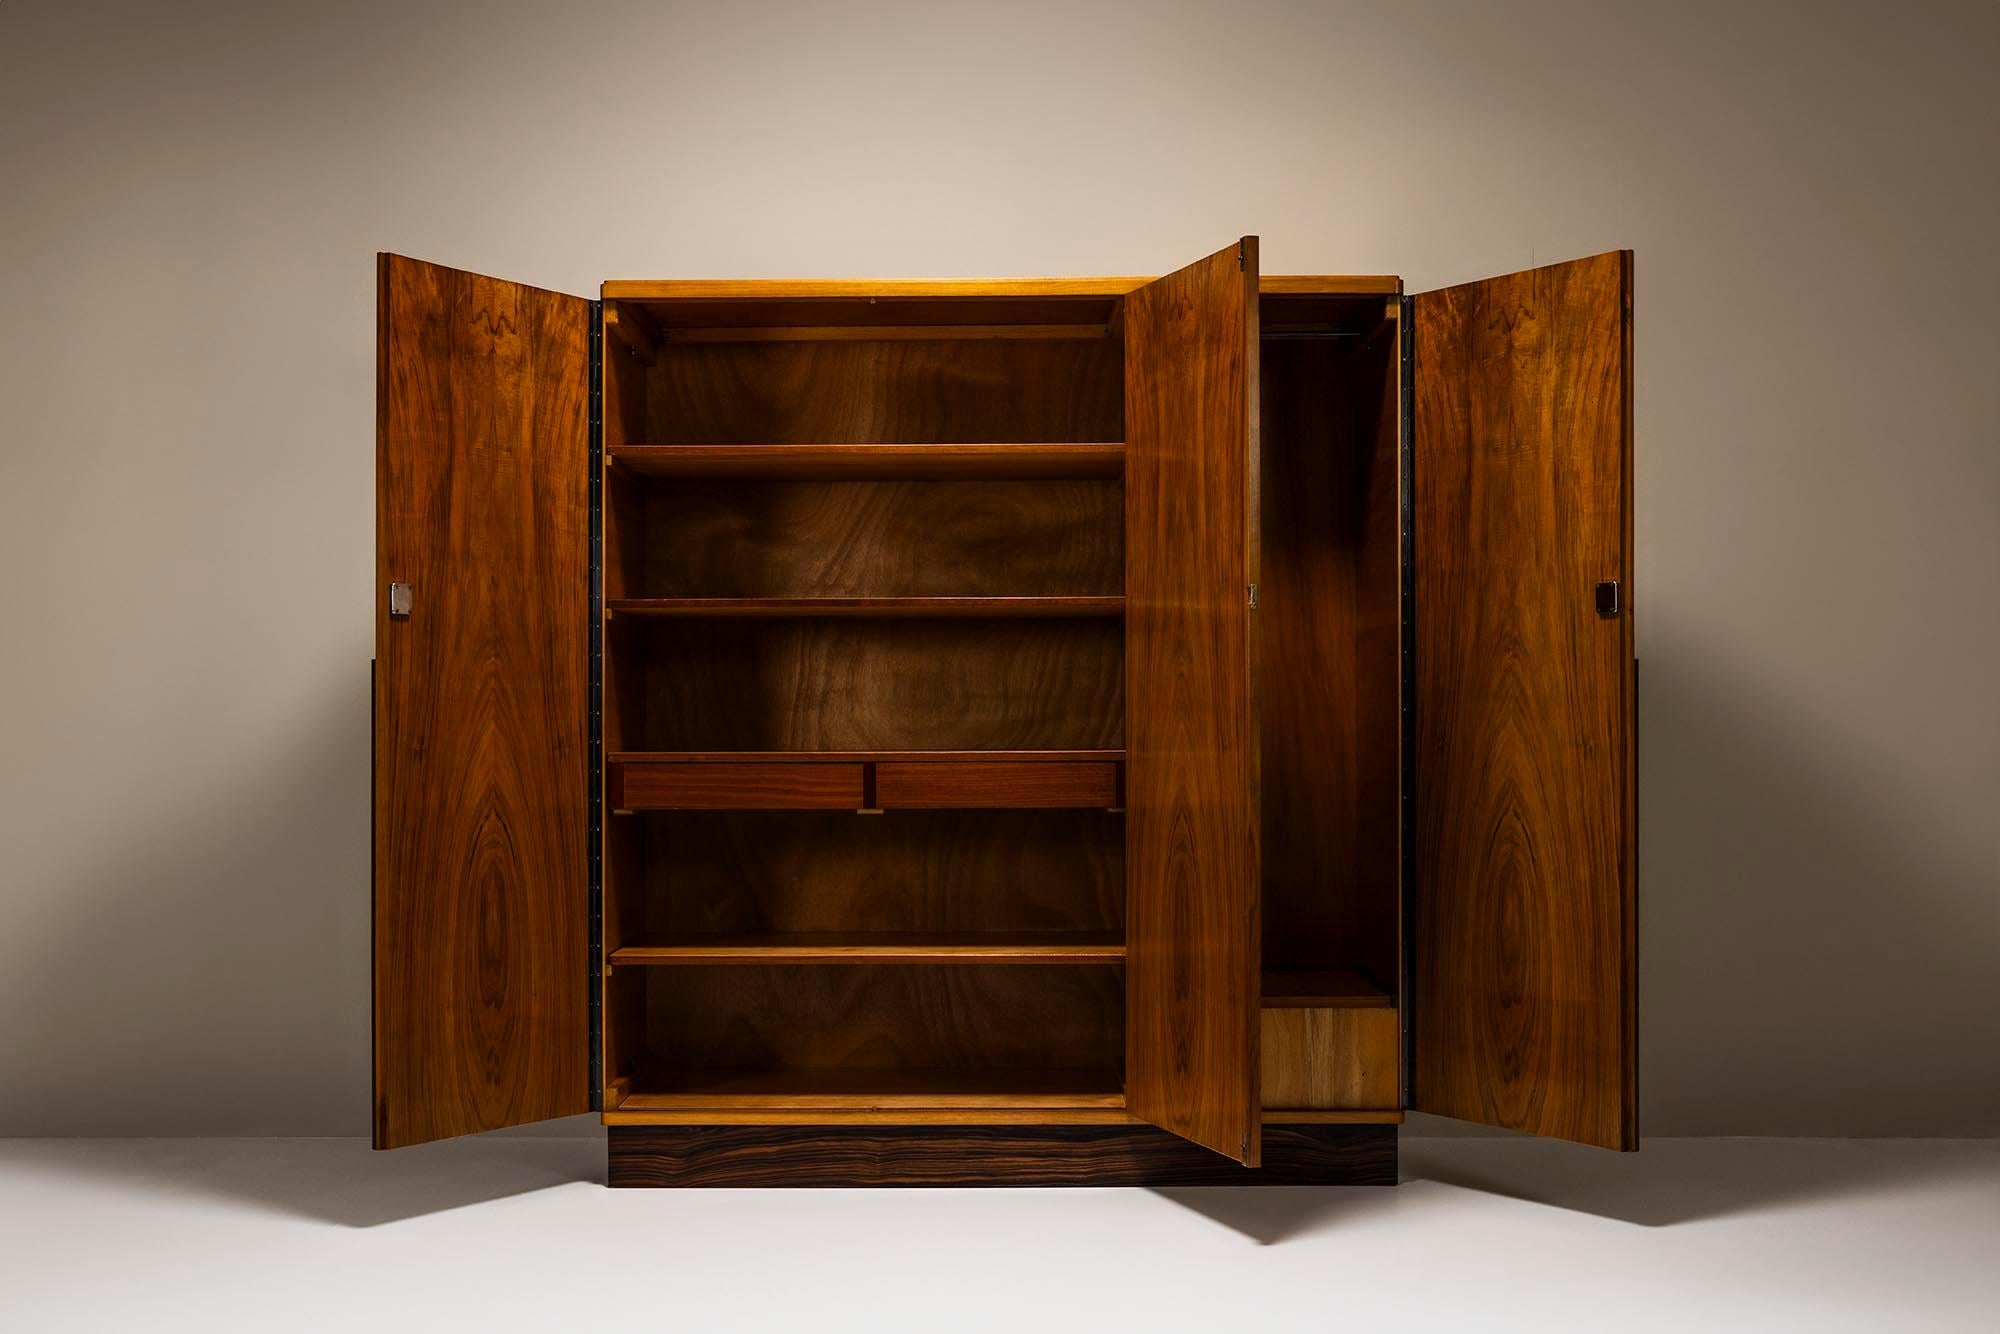 A Dutch private individual had this Art Deco wardrobe made to order by an obviously very skilled manufacturer. The traditional method and the associated quality is the reason that it has withstood the test of time. Let's take a look at the front